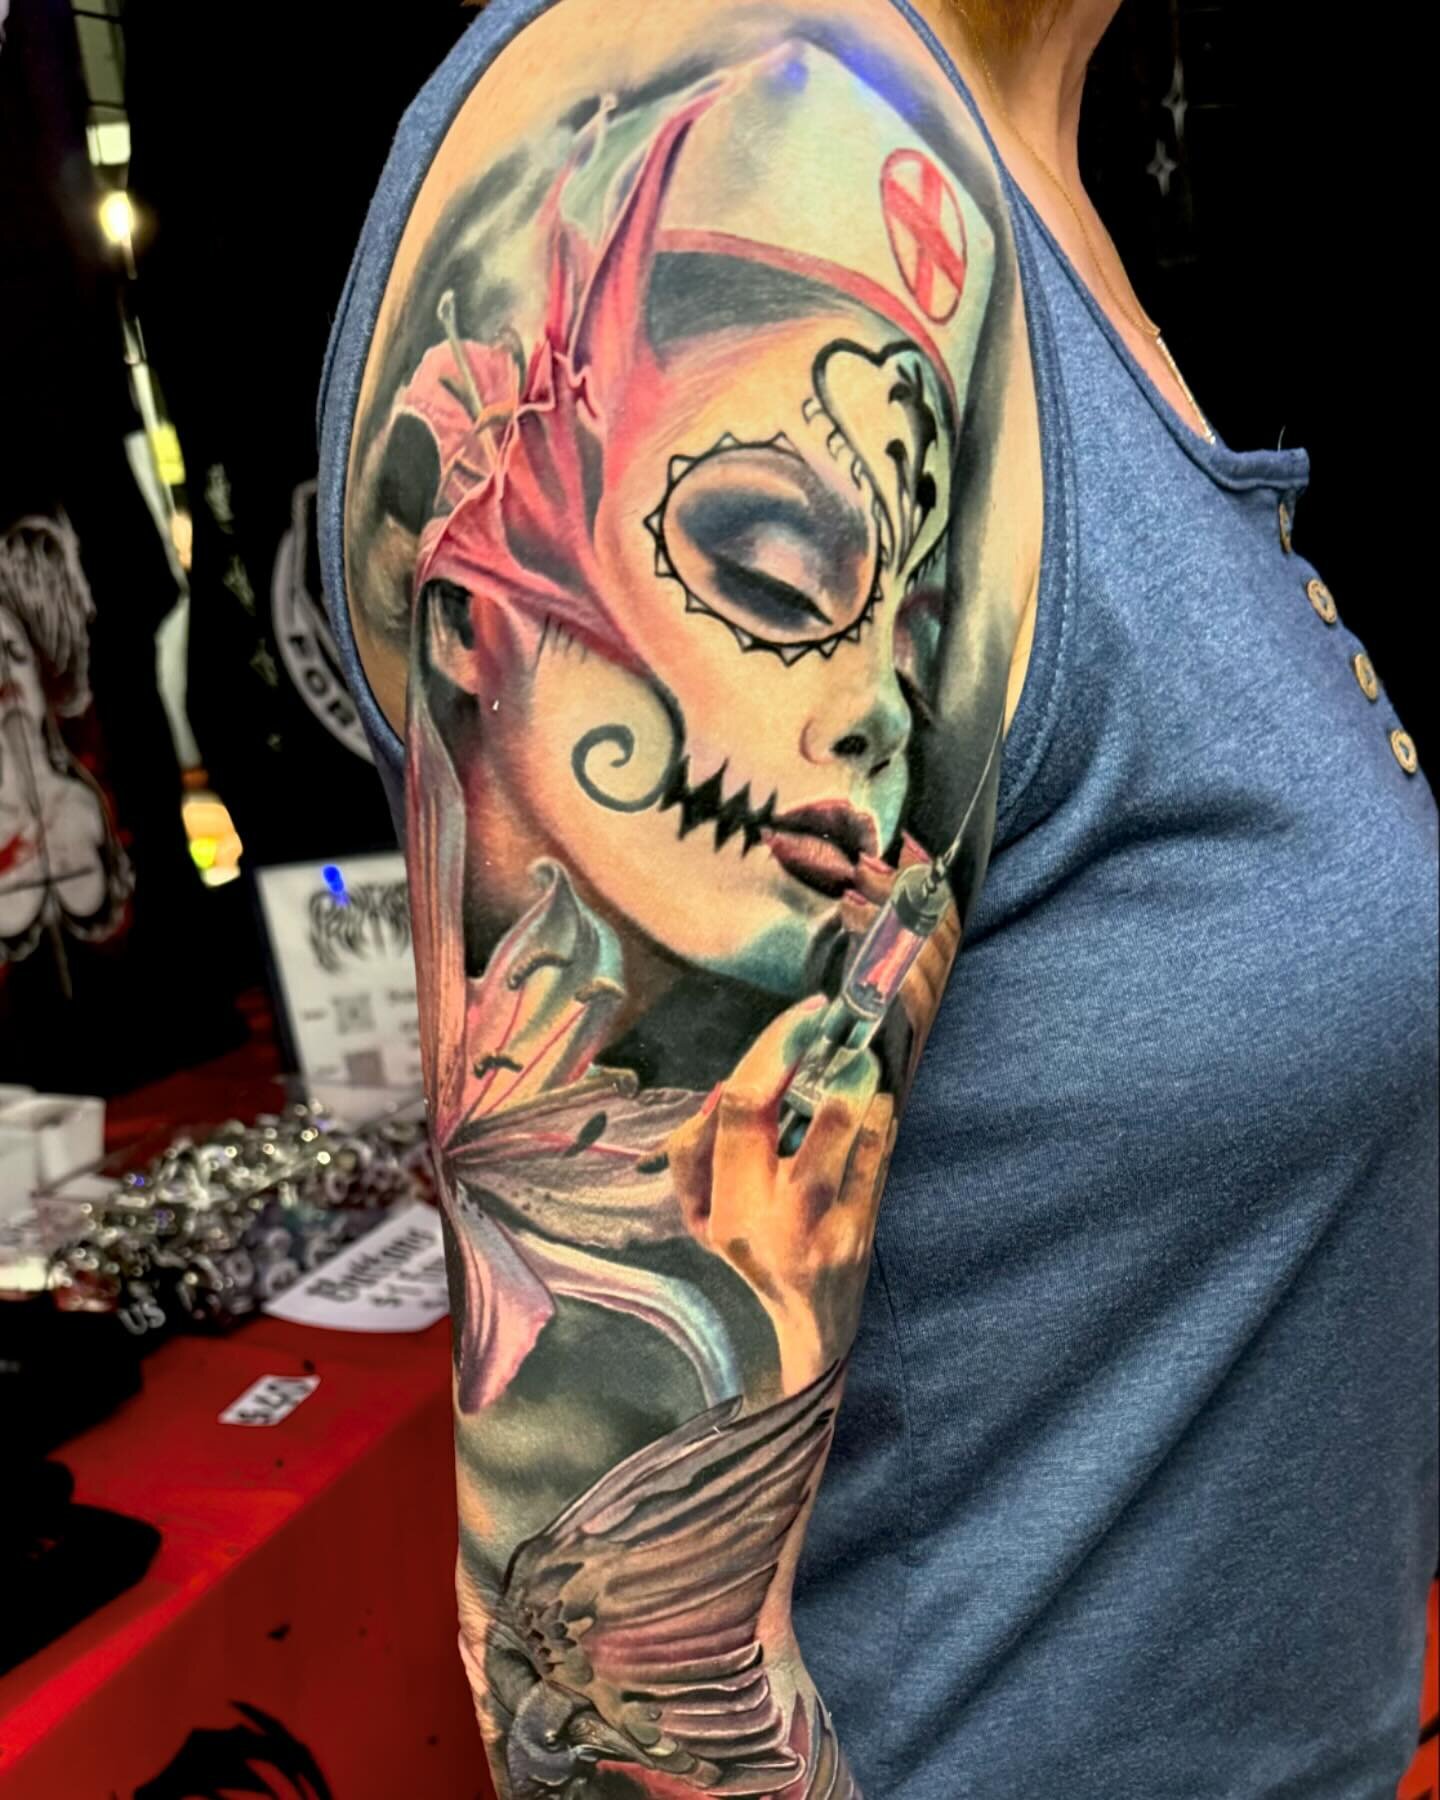 Got to finish this #sleeve @cyantattoo here in #daytonohio somewhere between 40-50 hours all together. Done in 6 sessions. The first 4 I used an ink brand, recently I consolidated 80 inks down to 12. Using the @empireinks painter color collection. I 